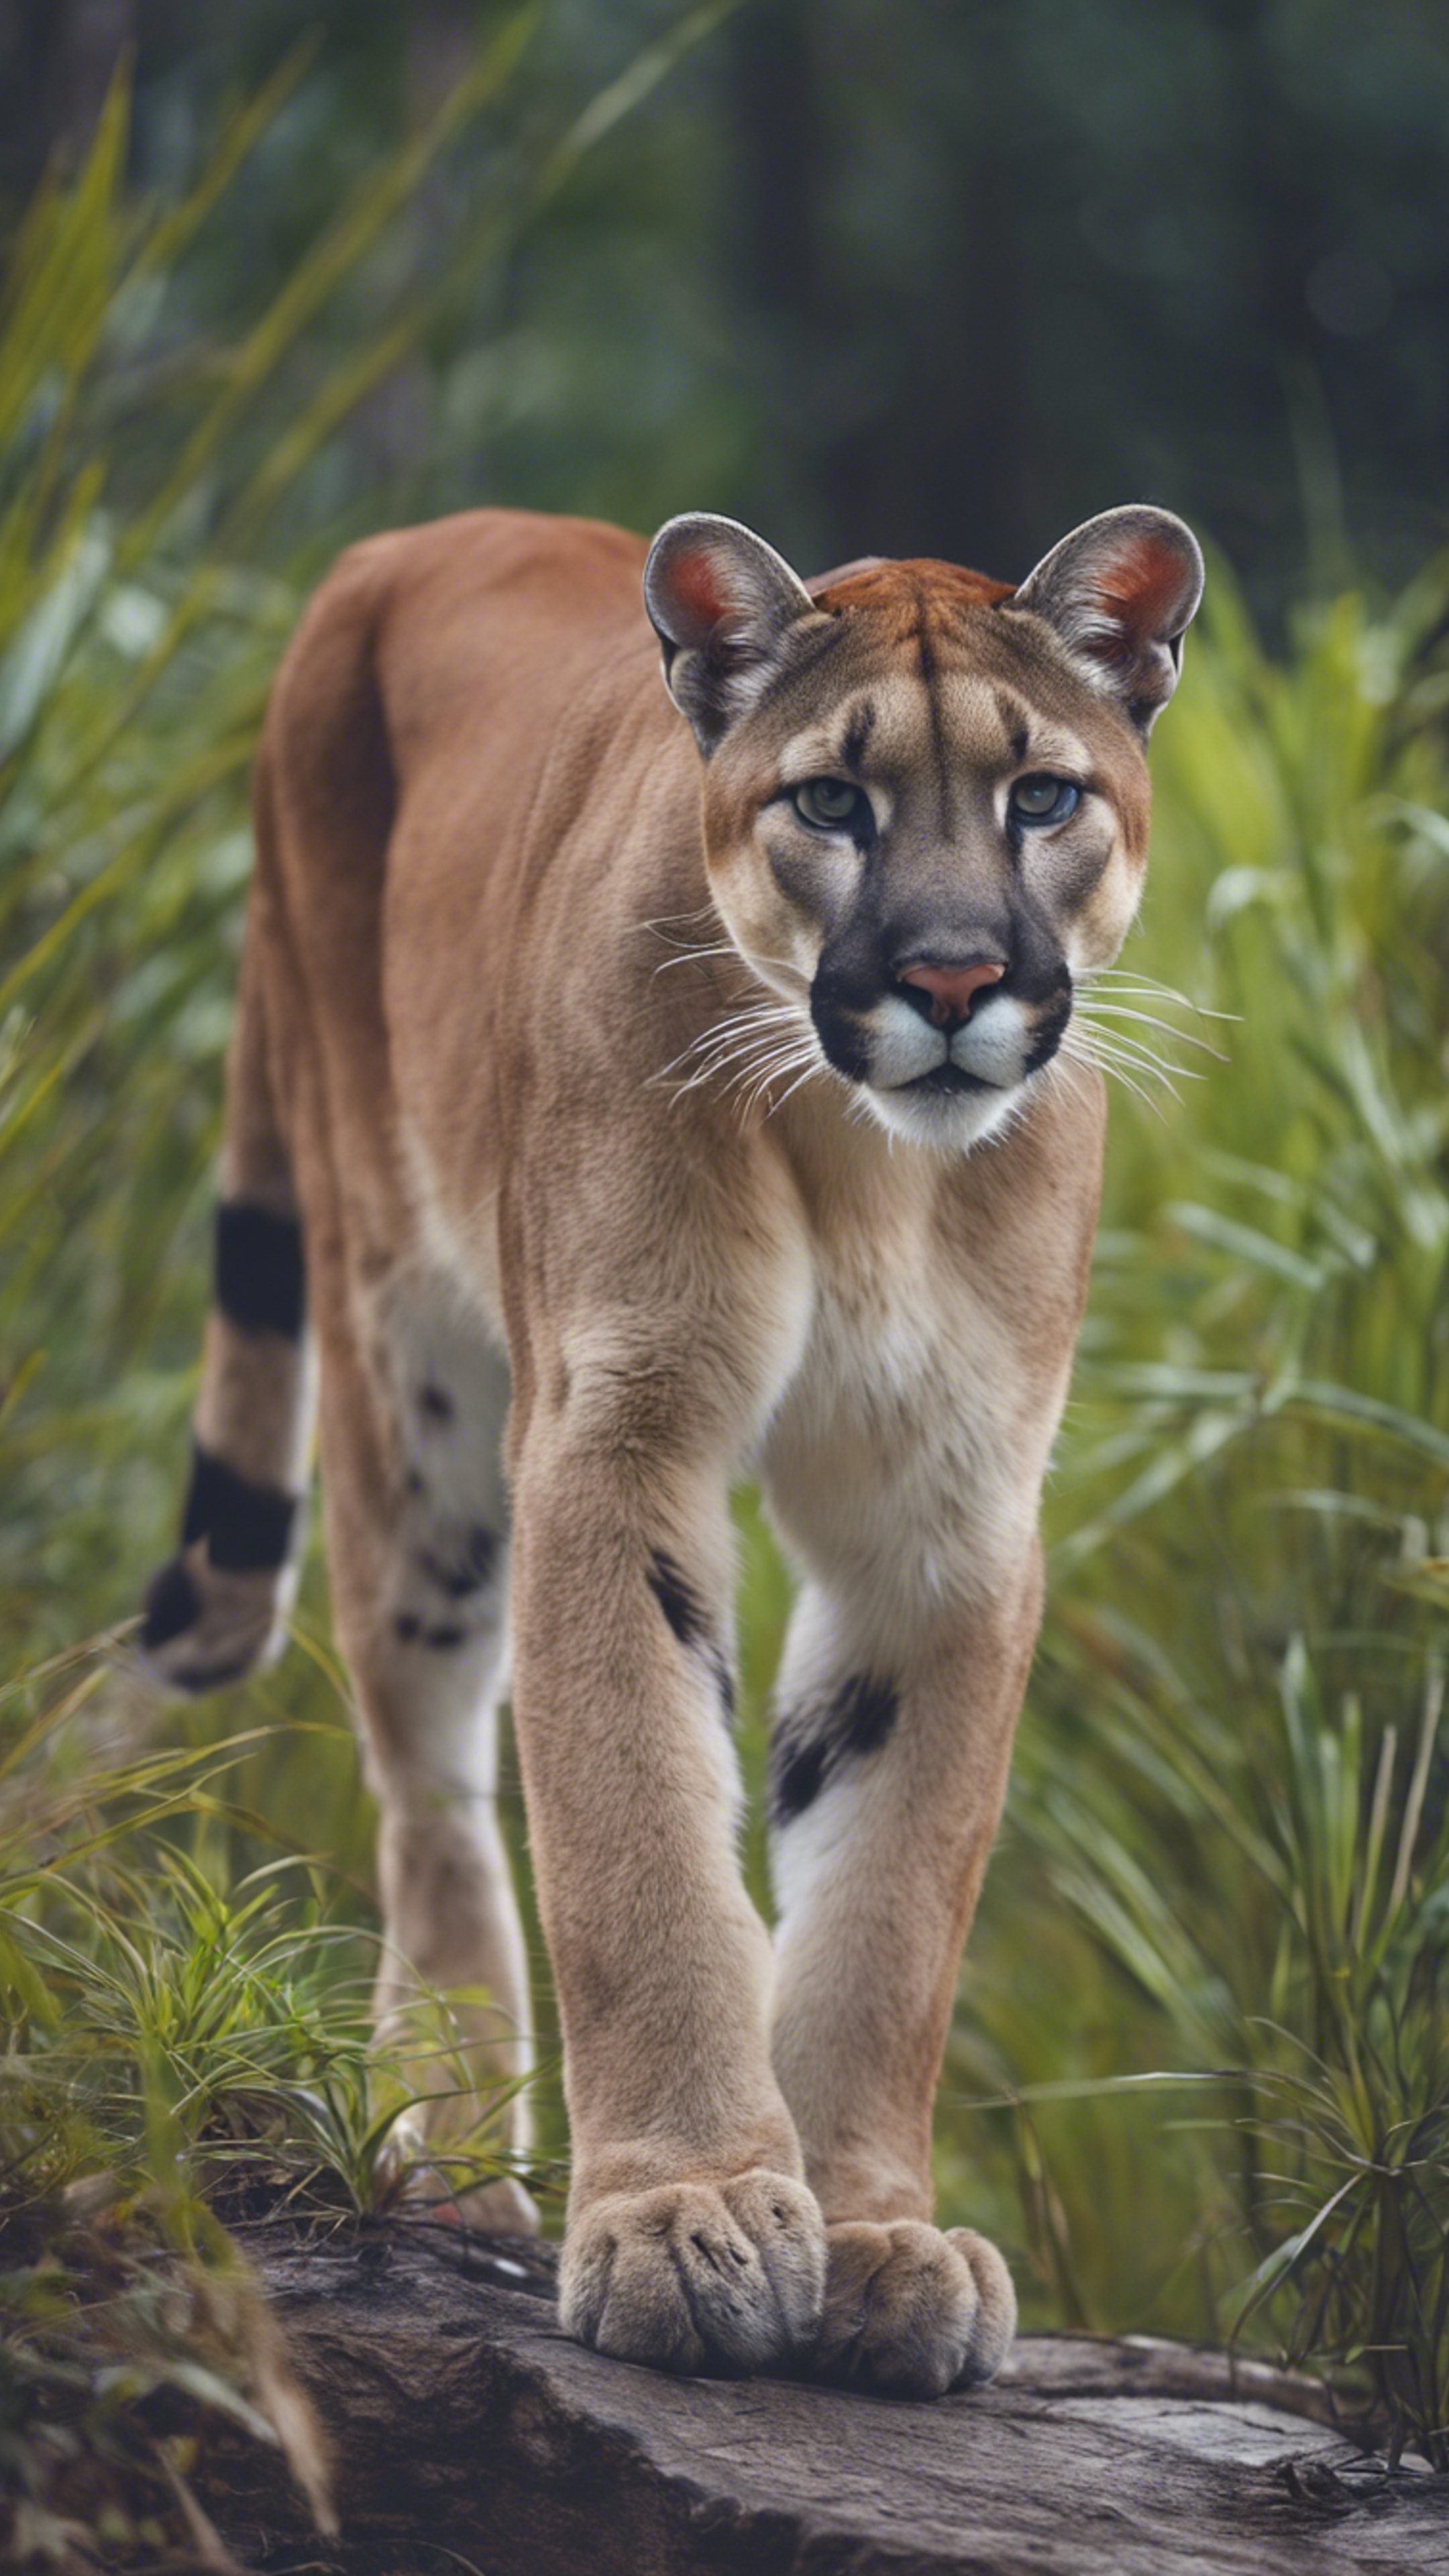 A detailed close-up of a Florida panther in the wild, with emphasis on its piercing eyes and natural habitat. Wallpaper[2ca581fd184749eaac54]